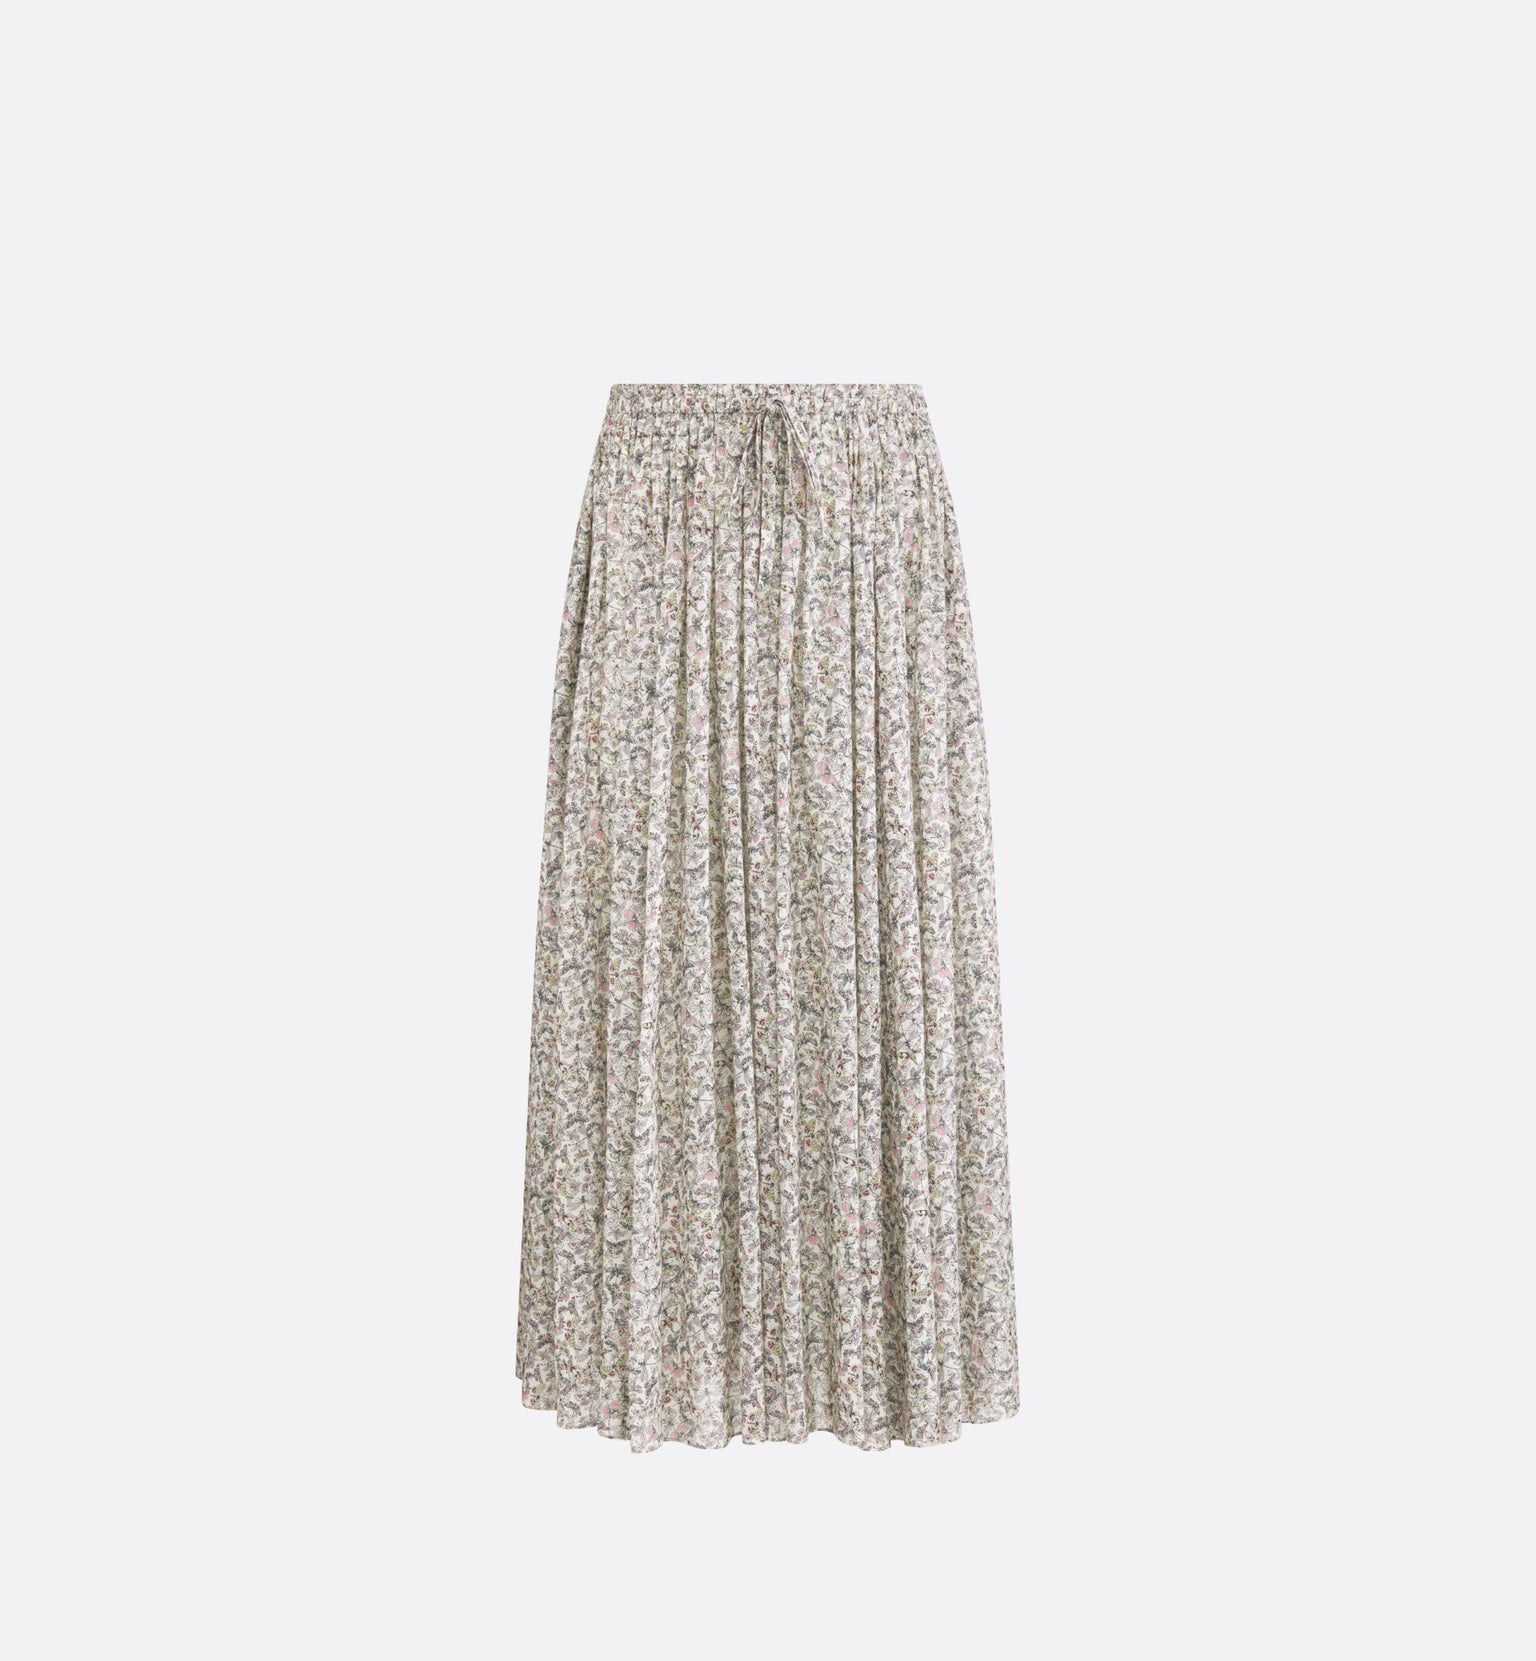 Flared Mid-Length Skirt • White Cotton Muslin with Multicolor Libellule Camouflage Motif